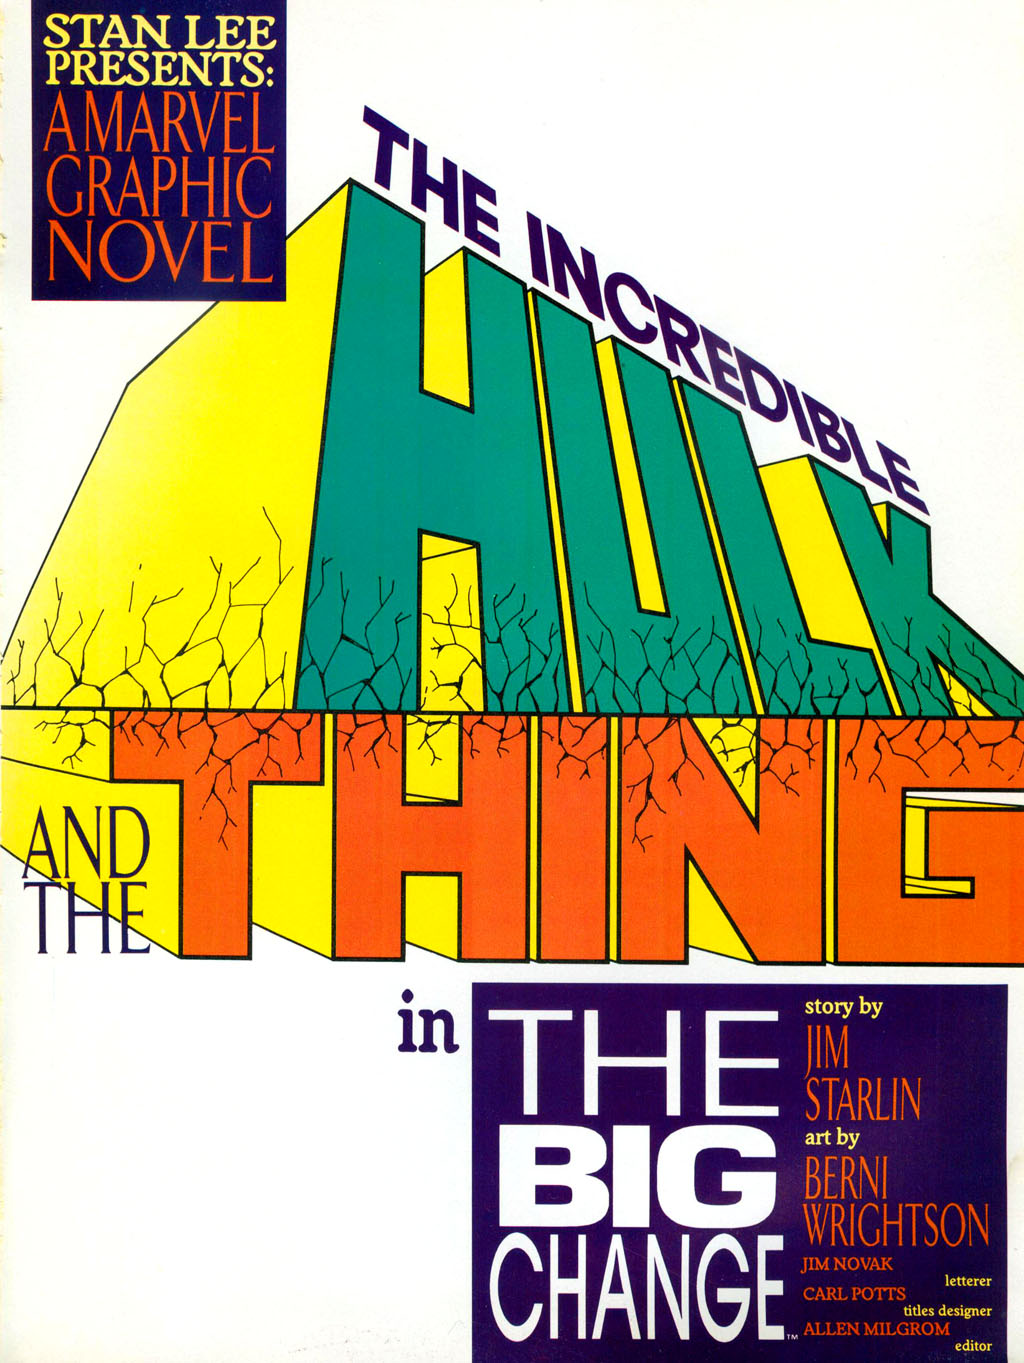 Read online Marvel Graphic Novel comic -  Issue #29 - Hulk & Thing - The Big Change - 2